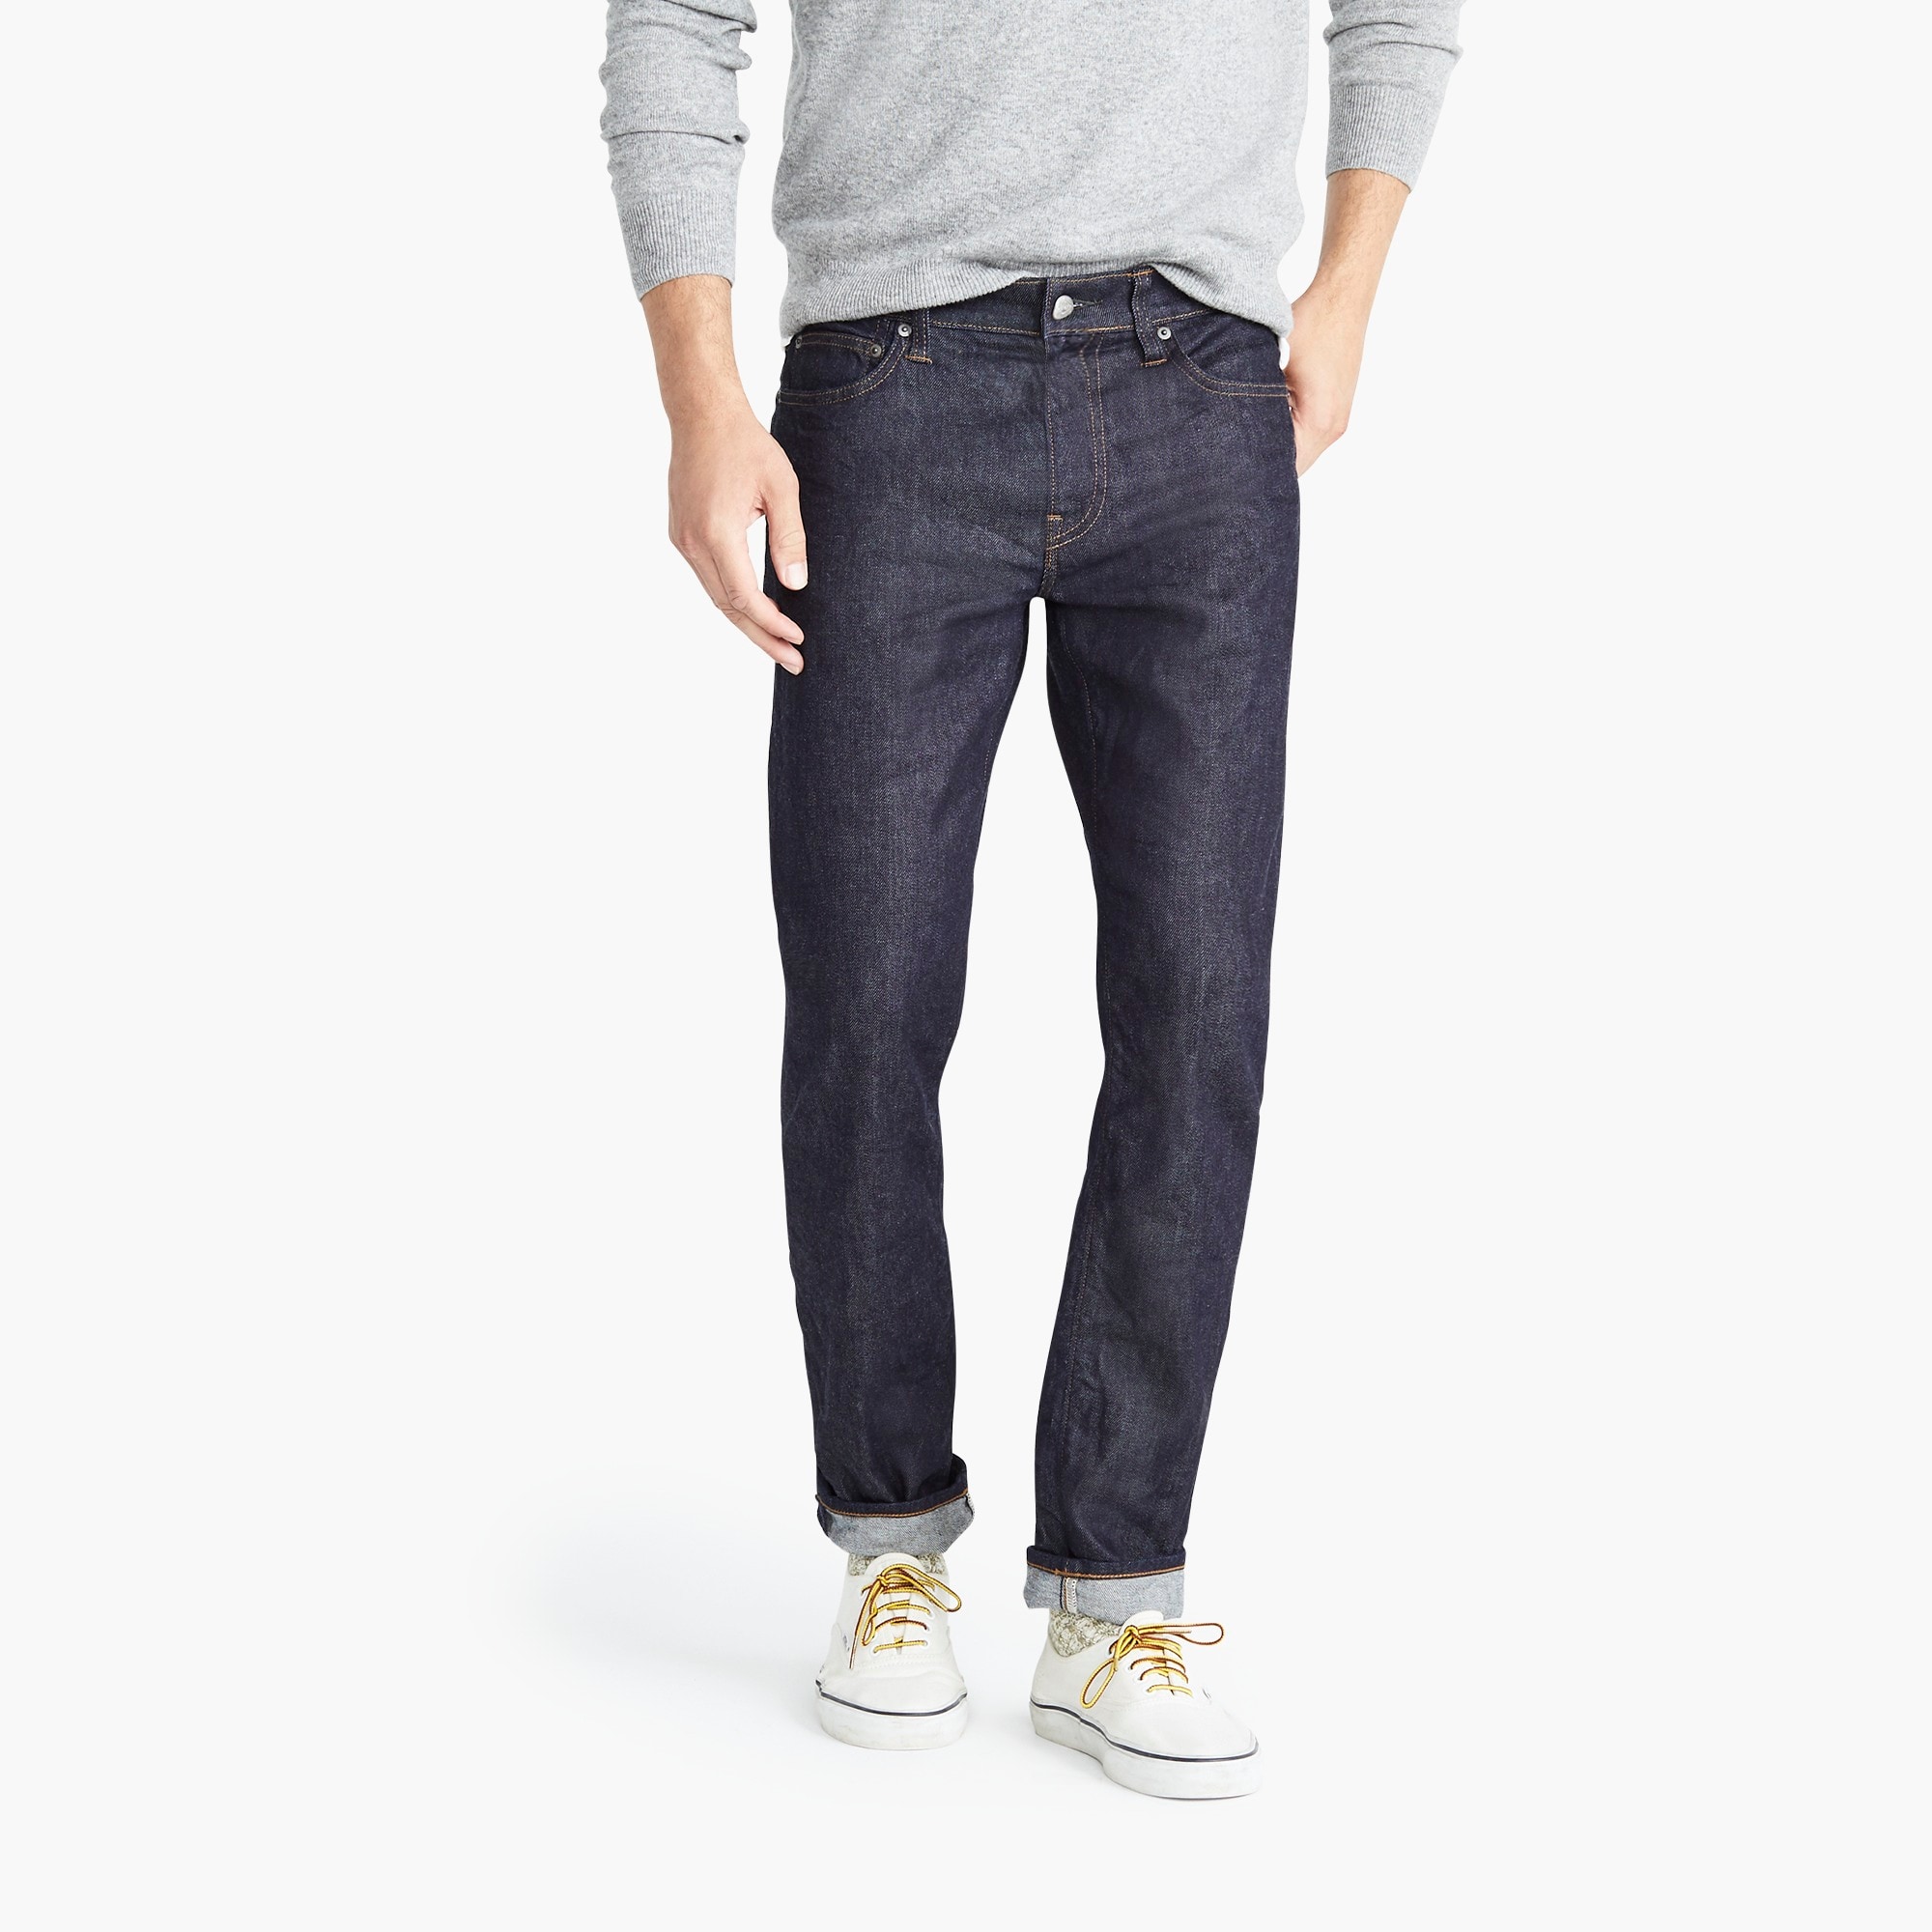 narrow fitting jeans